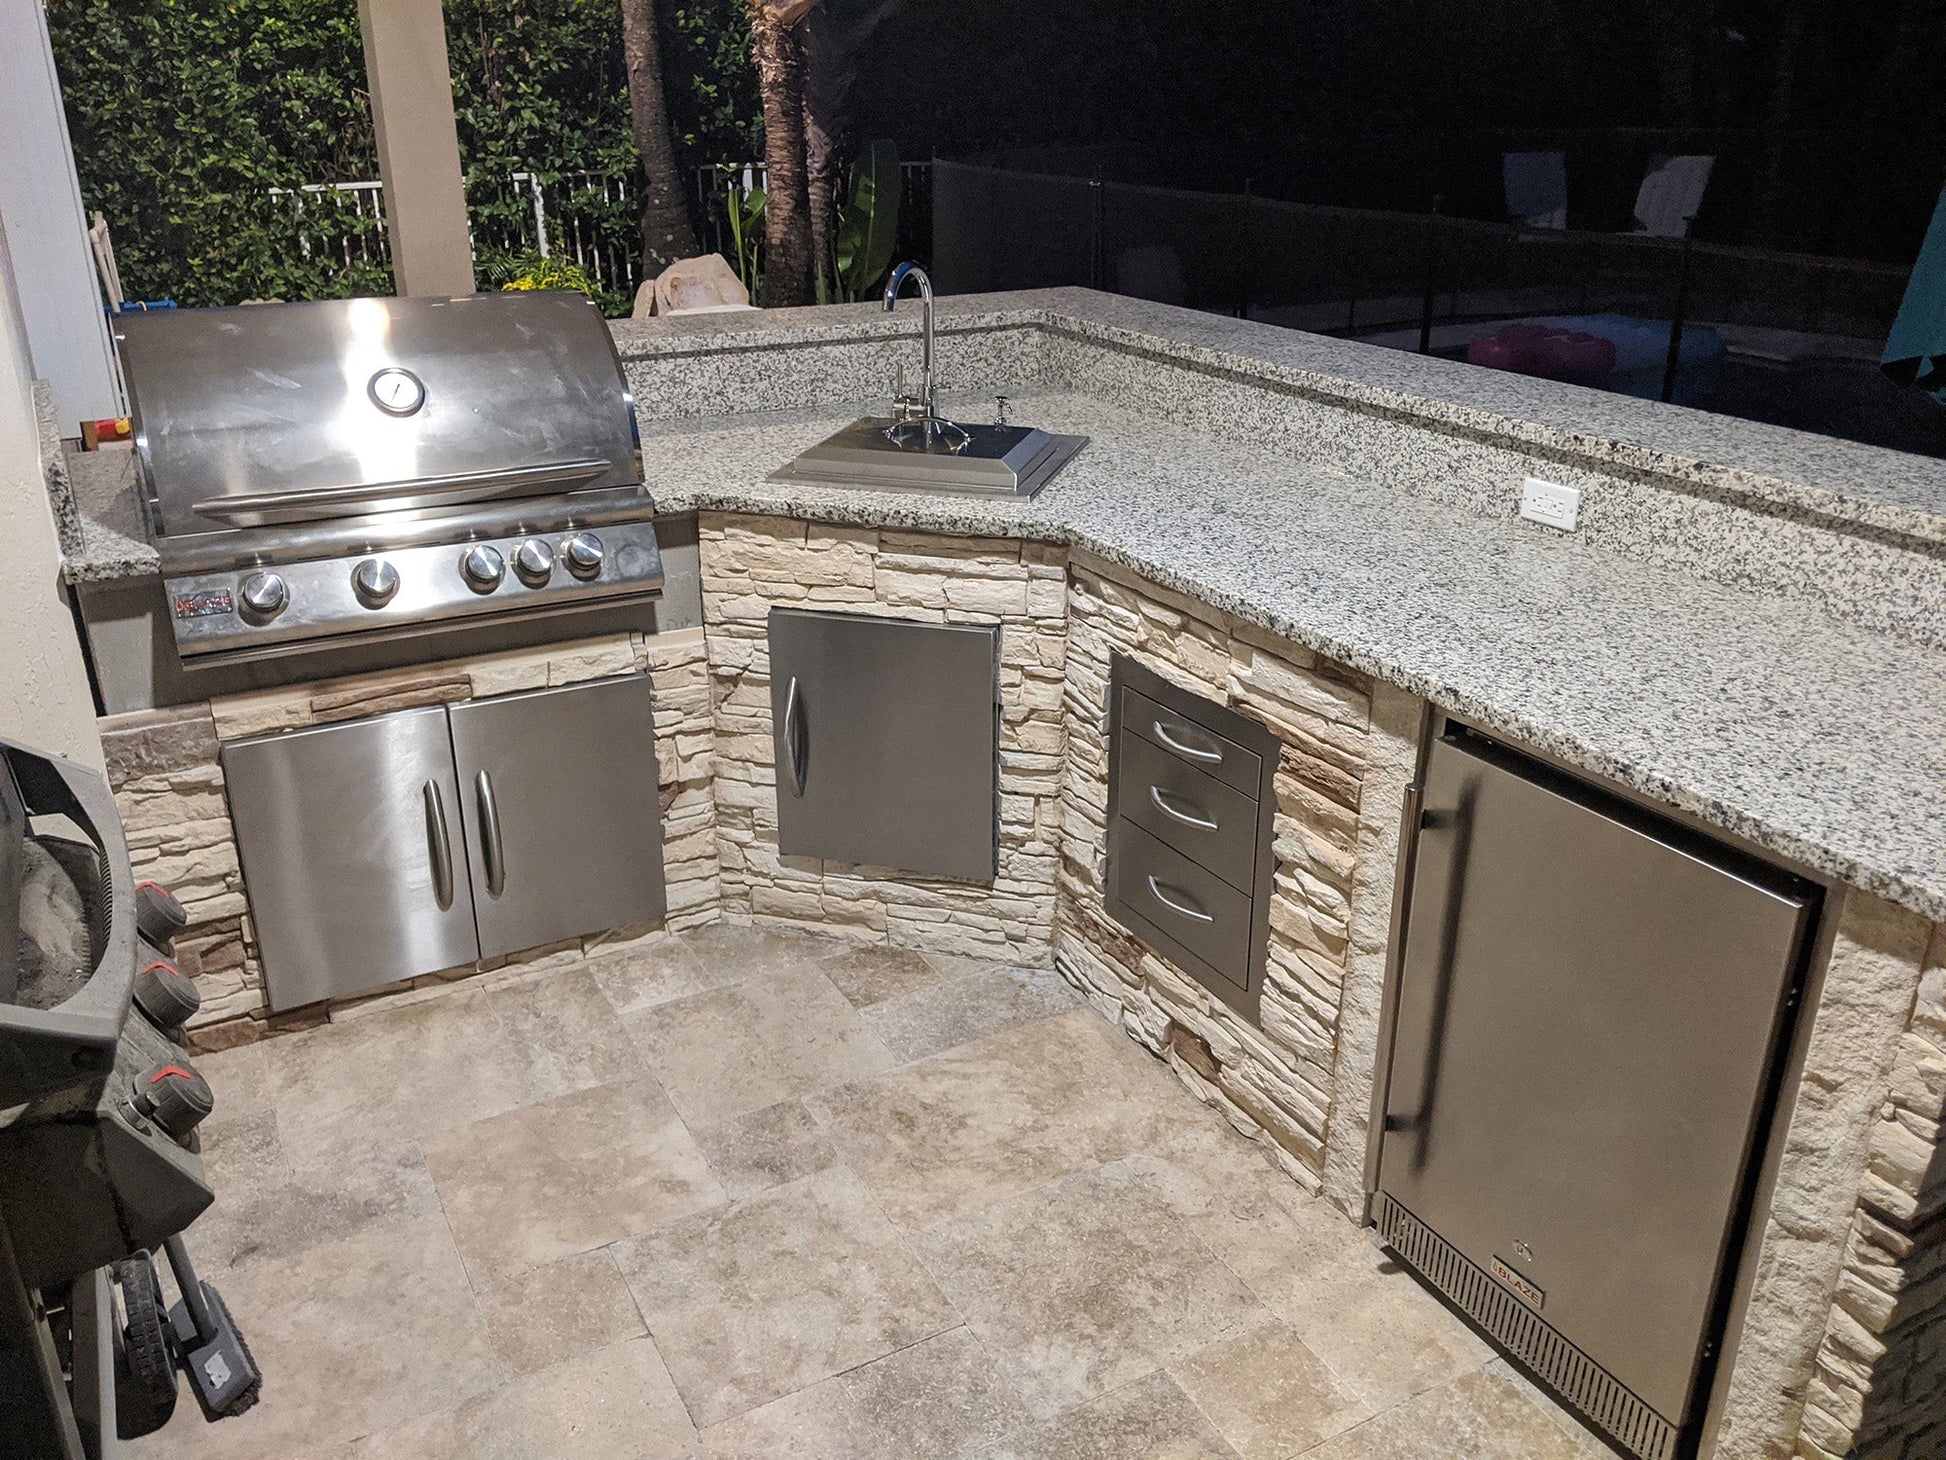 9ft Manufactured Stacked Stone Outdoor Kitchen Island, Ready to assemble, RTA. Countertops and Appliances sold separately - Sunzout Outdoor Spaces LLC